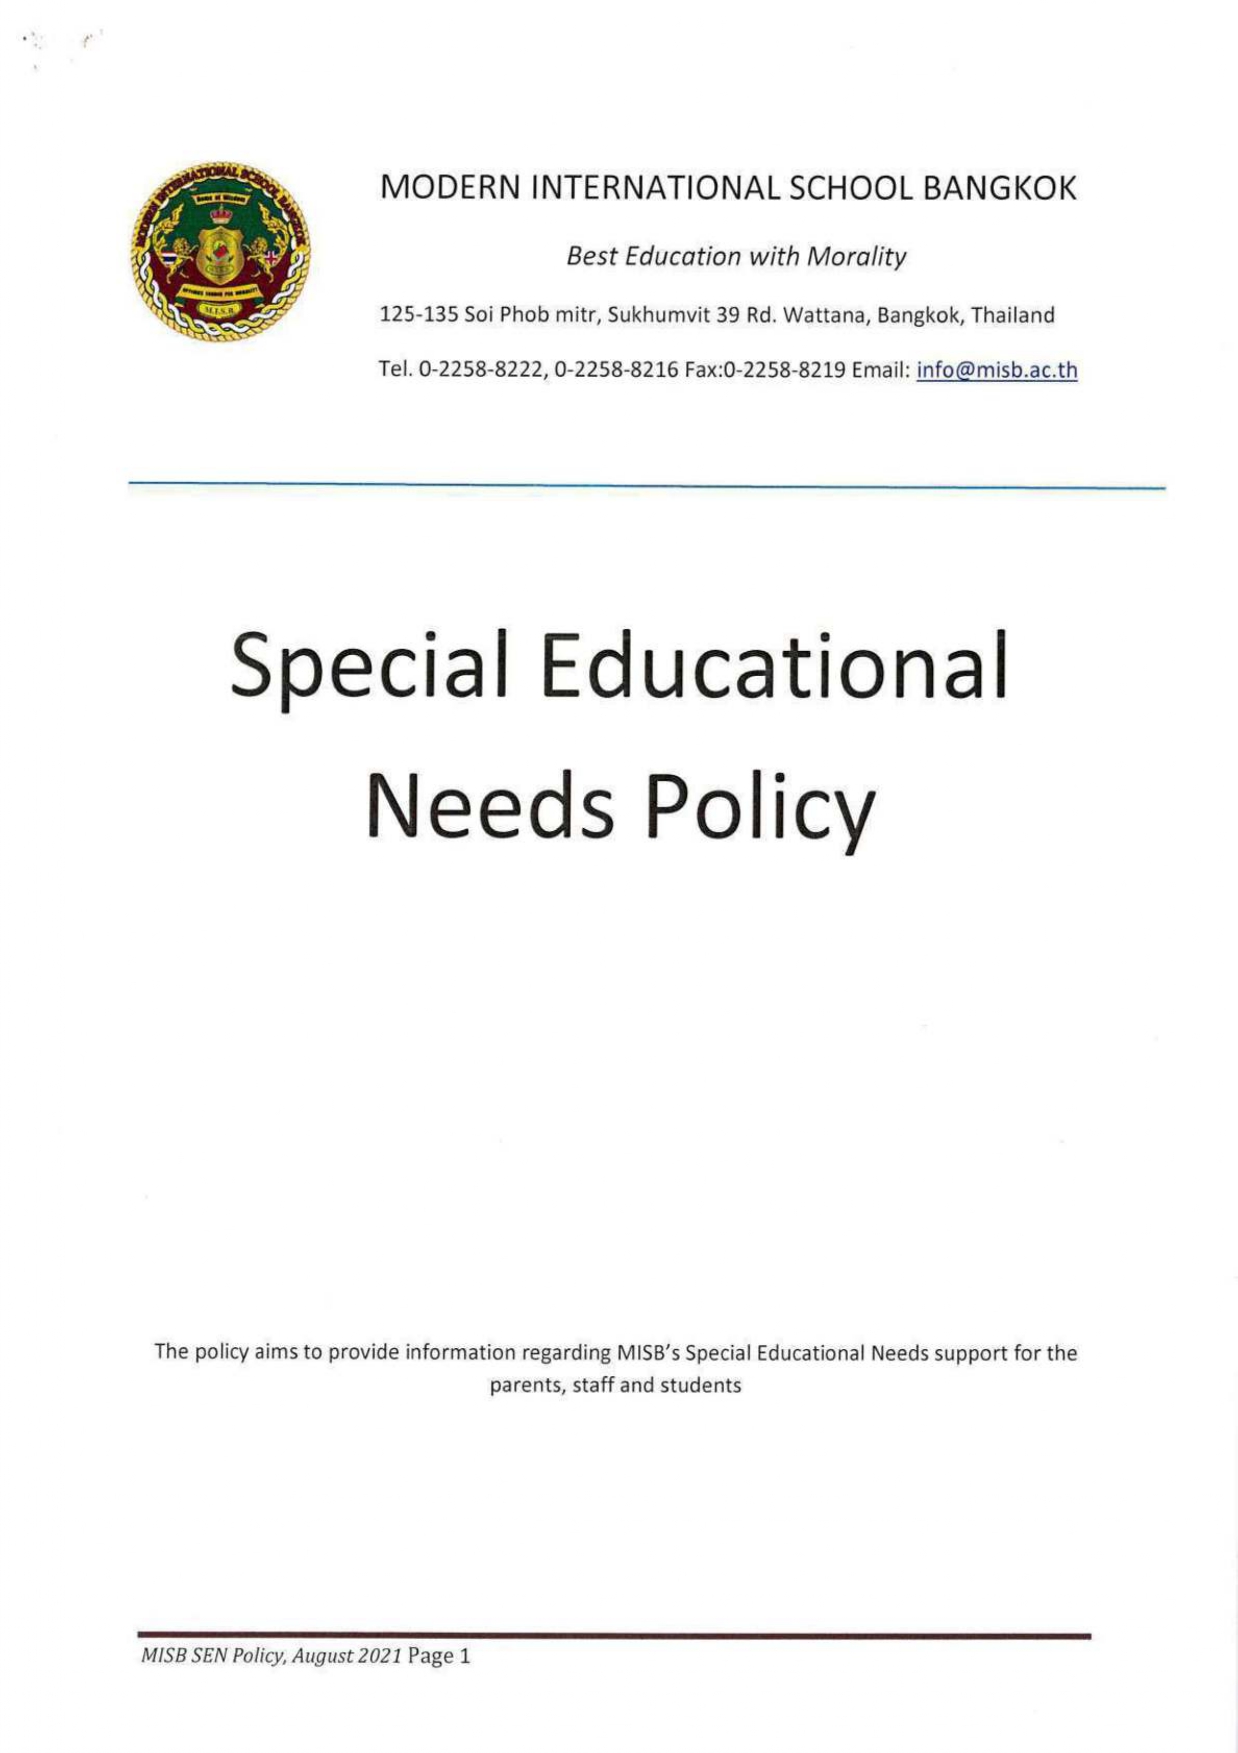 SPECIAL EDUCATIONAL NEEDS POLICY page 0001